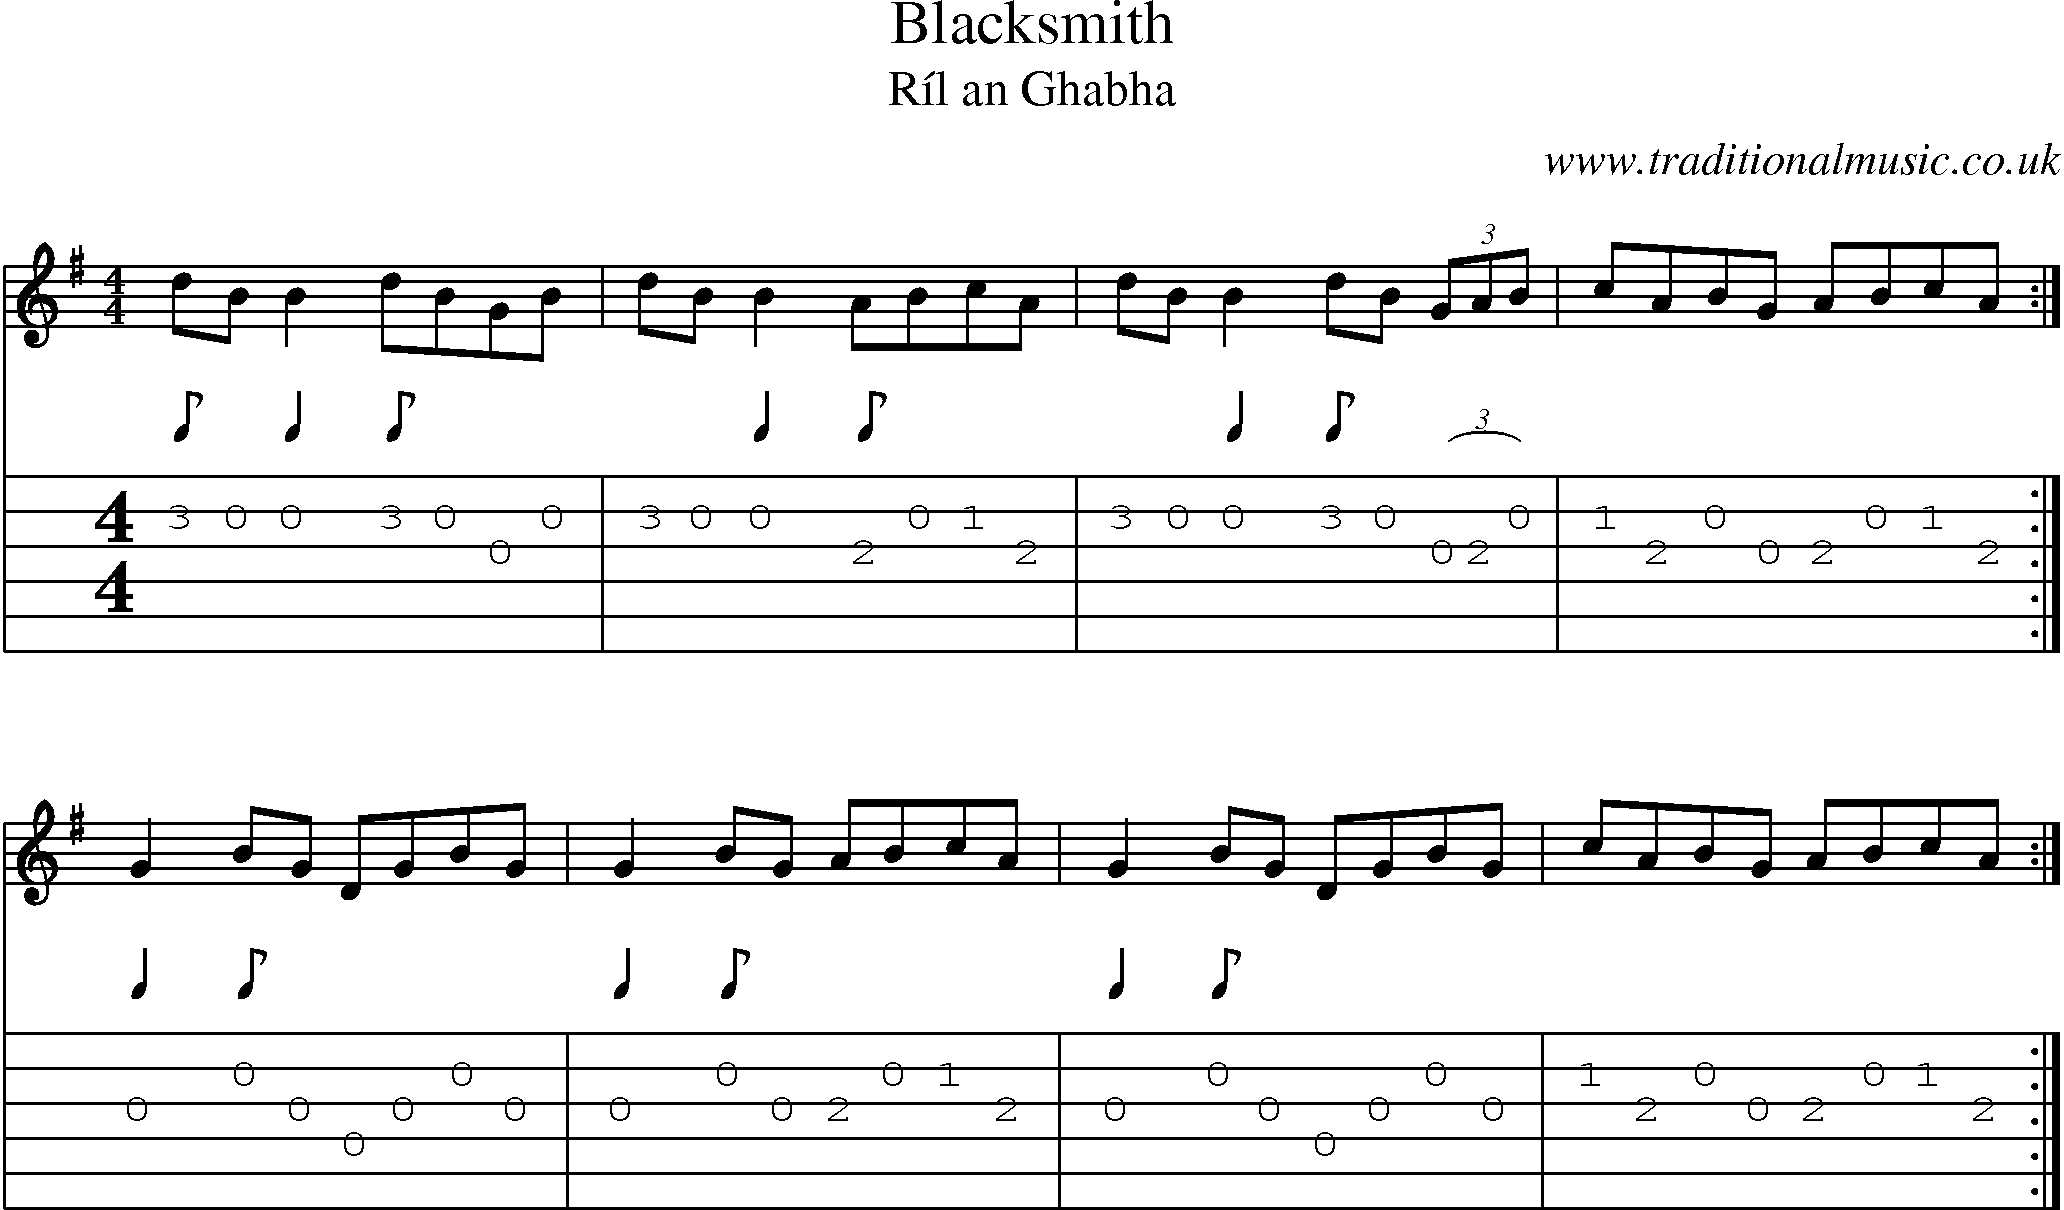 Music Score and Guitar Tabs for Blacksmith